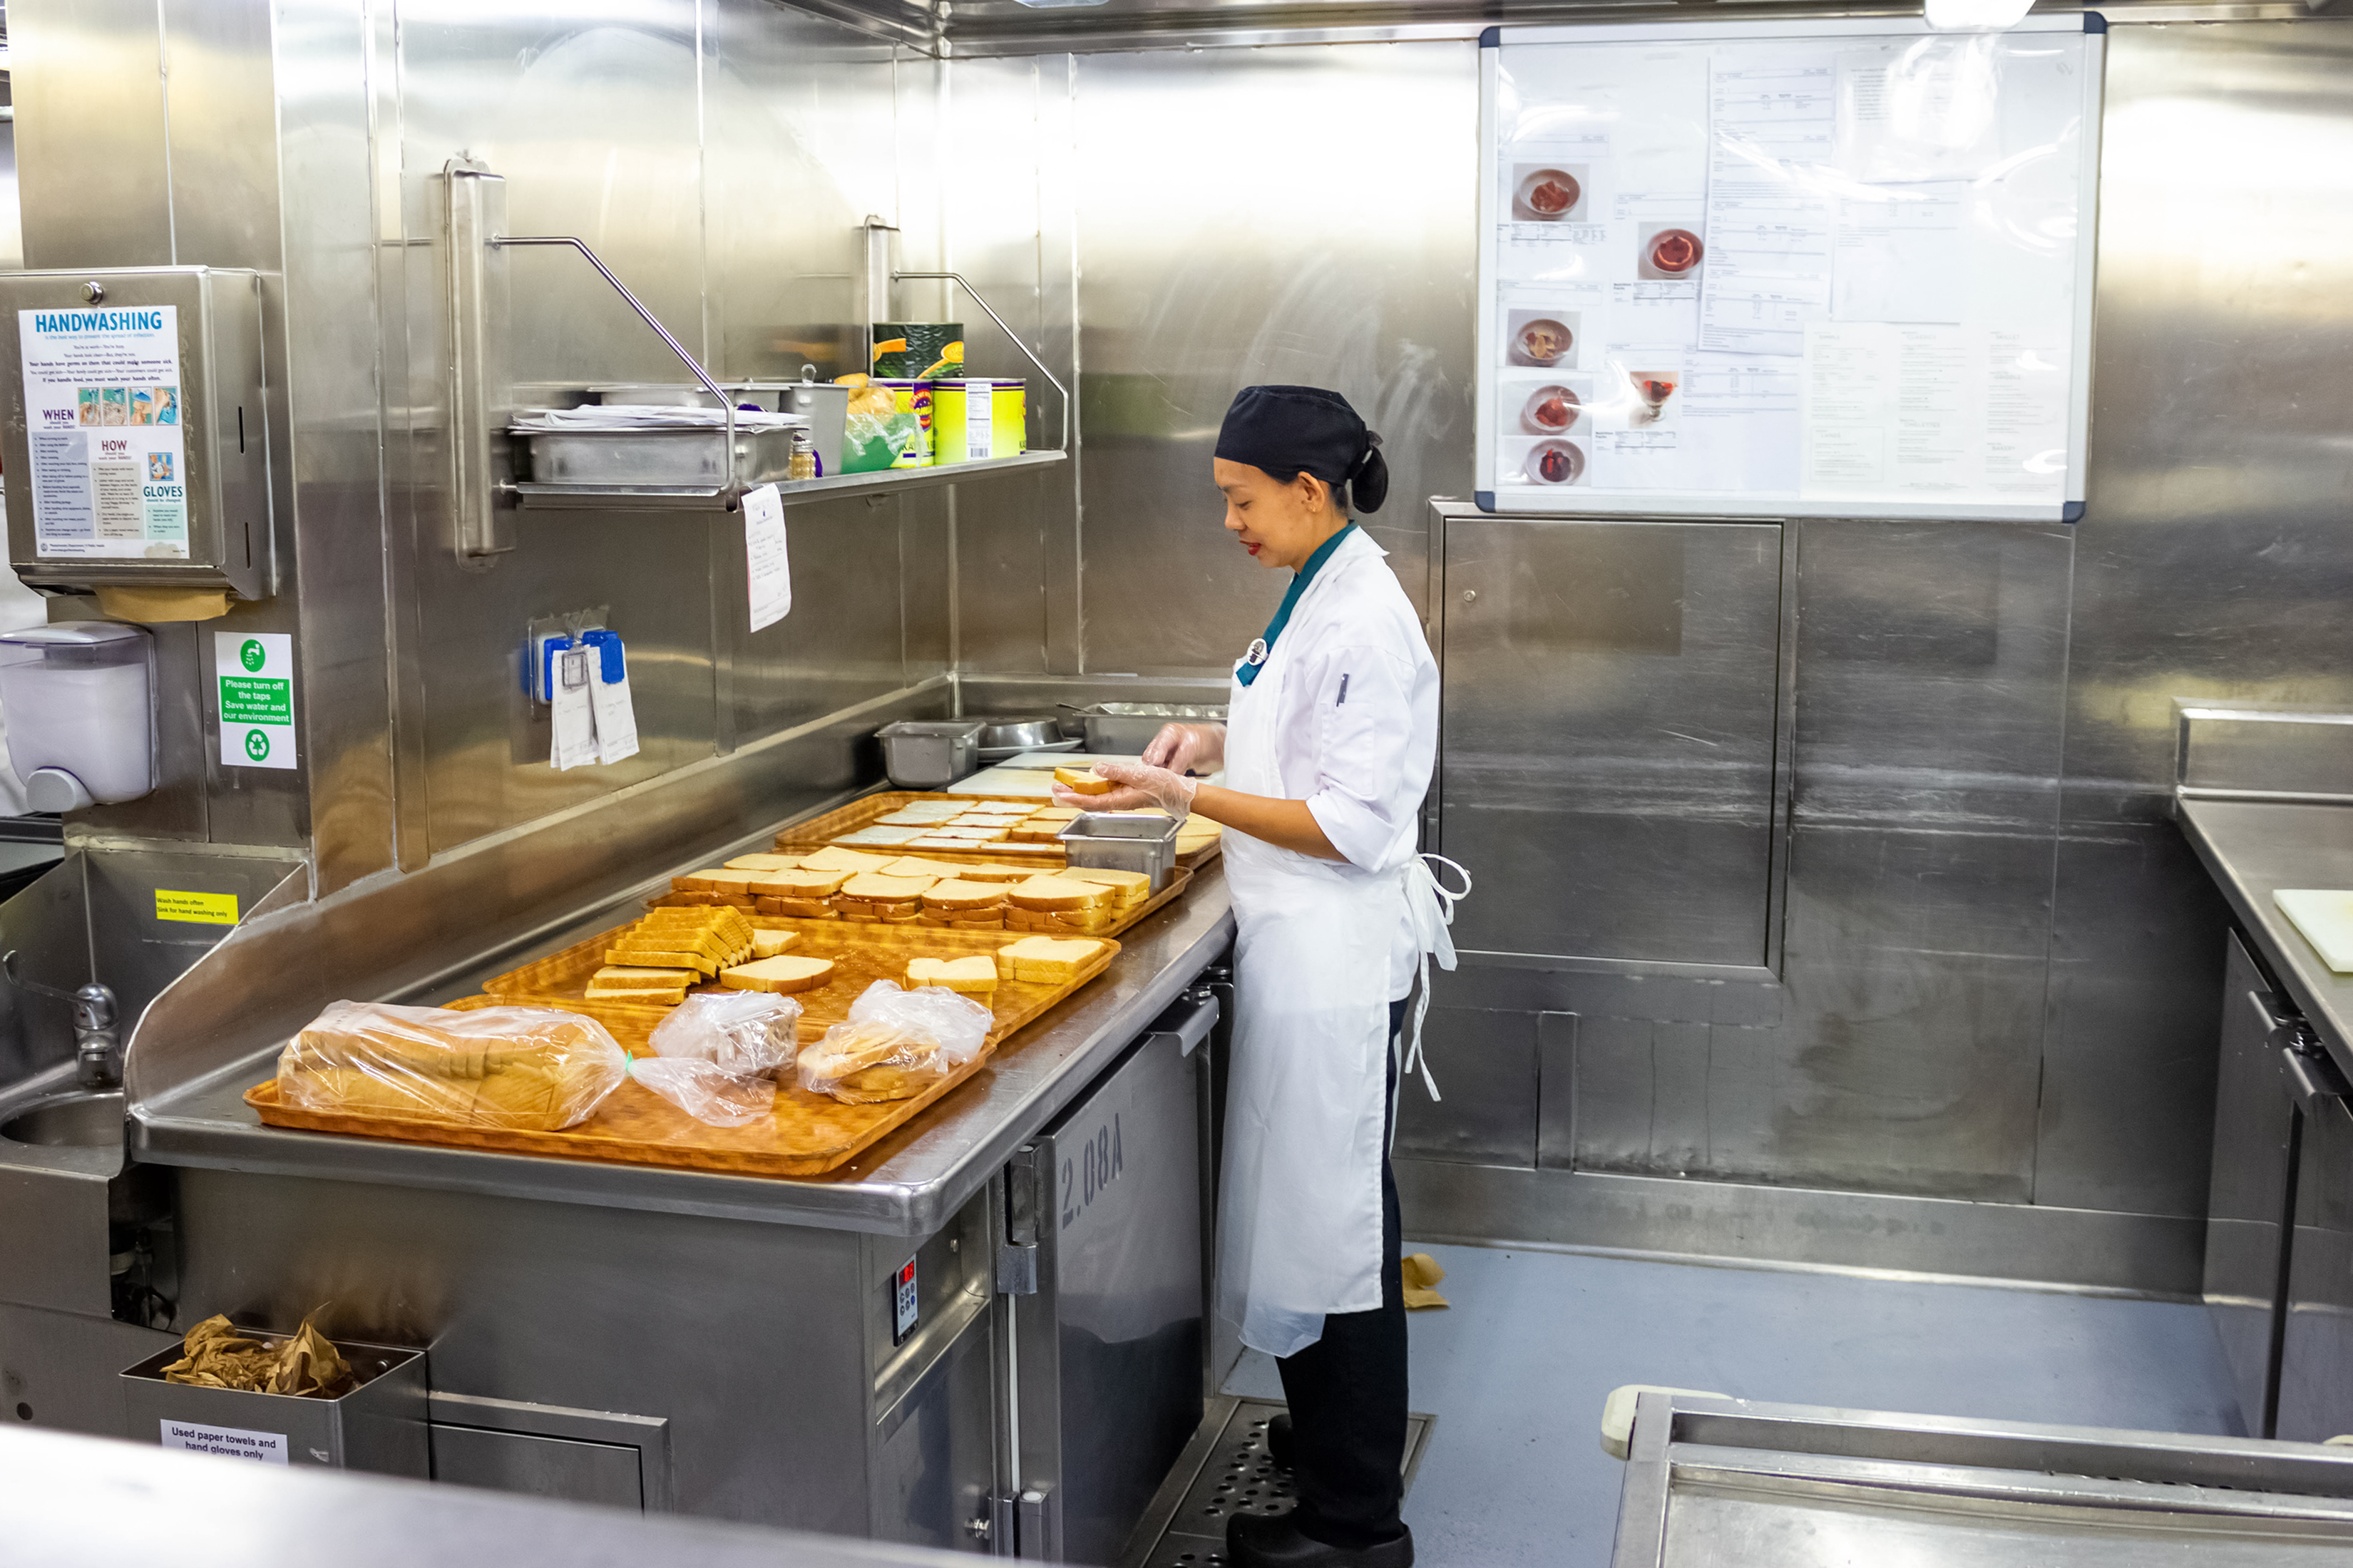 A woman stands in an industrial kitchen with bread making sandwiches